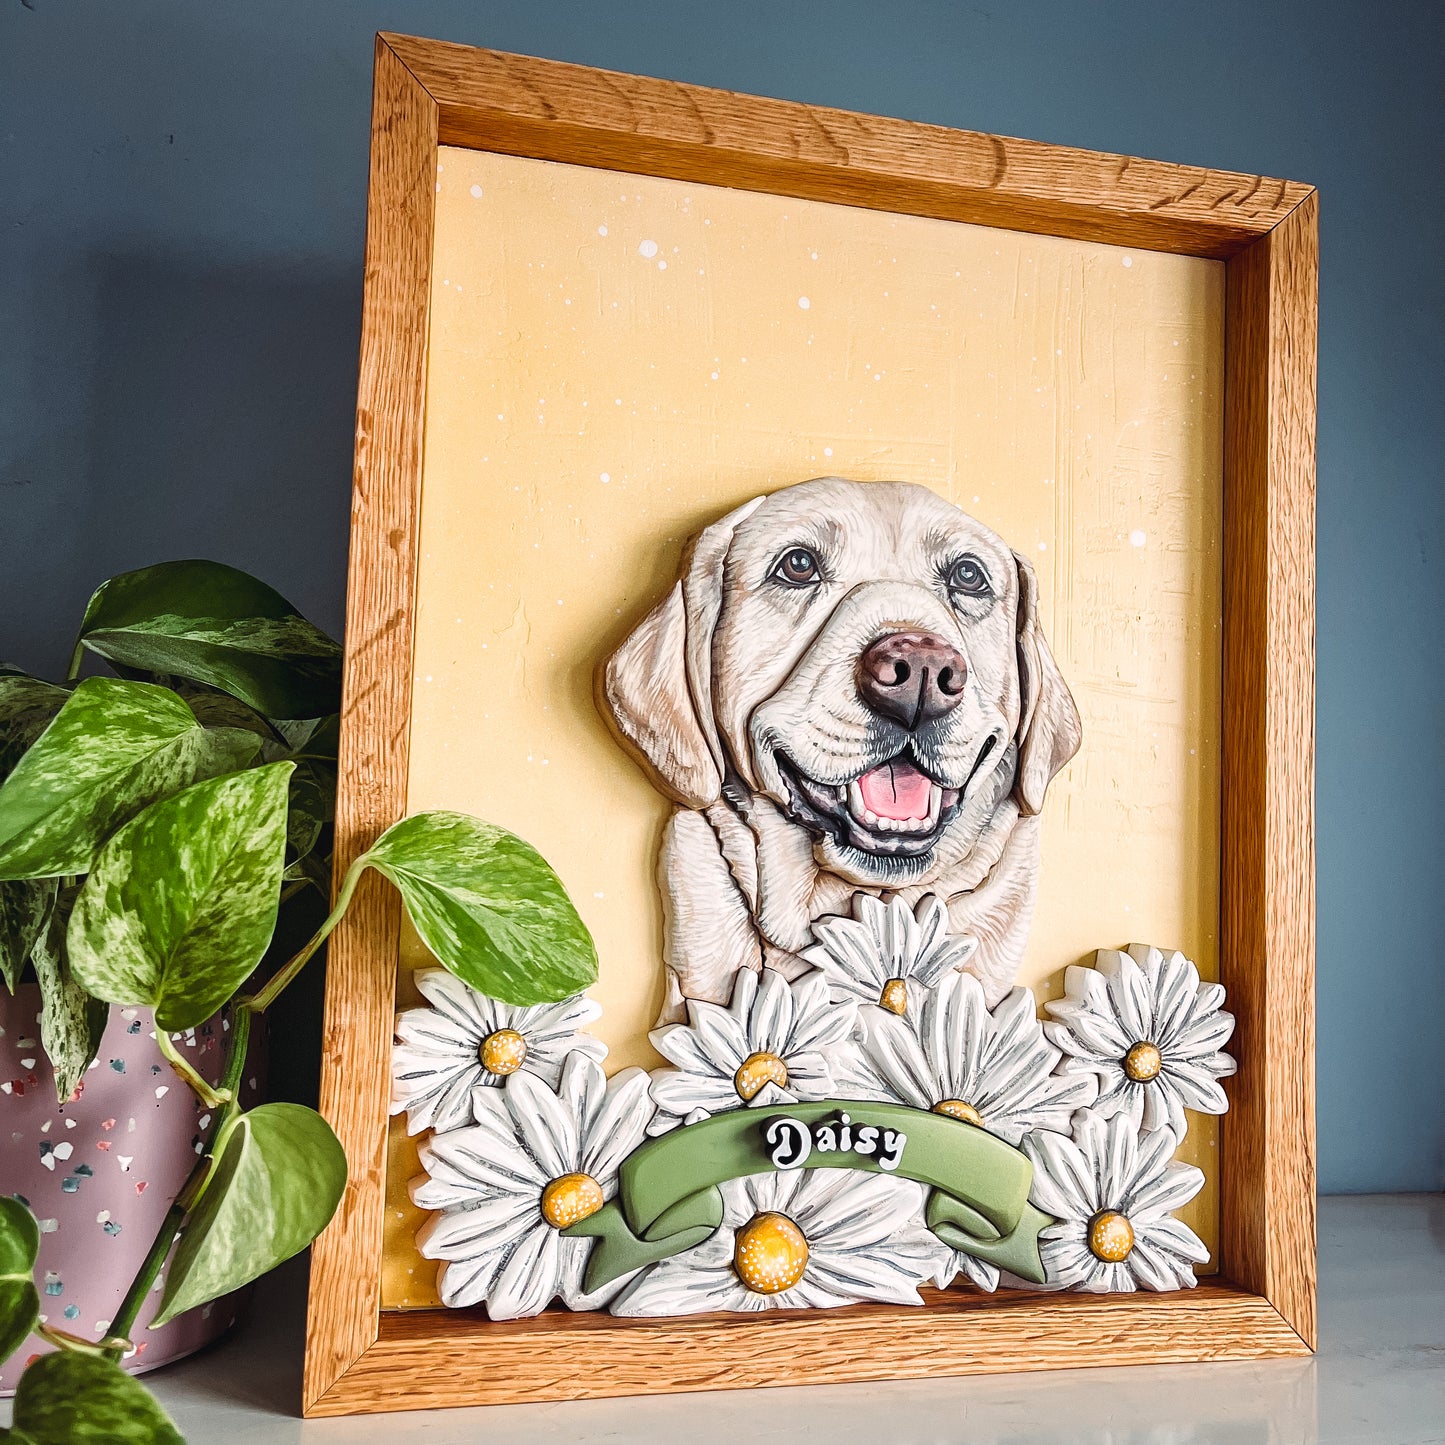 Pet Portrait with Flowers! (Design work included)